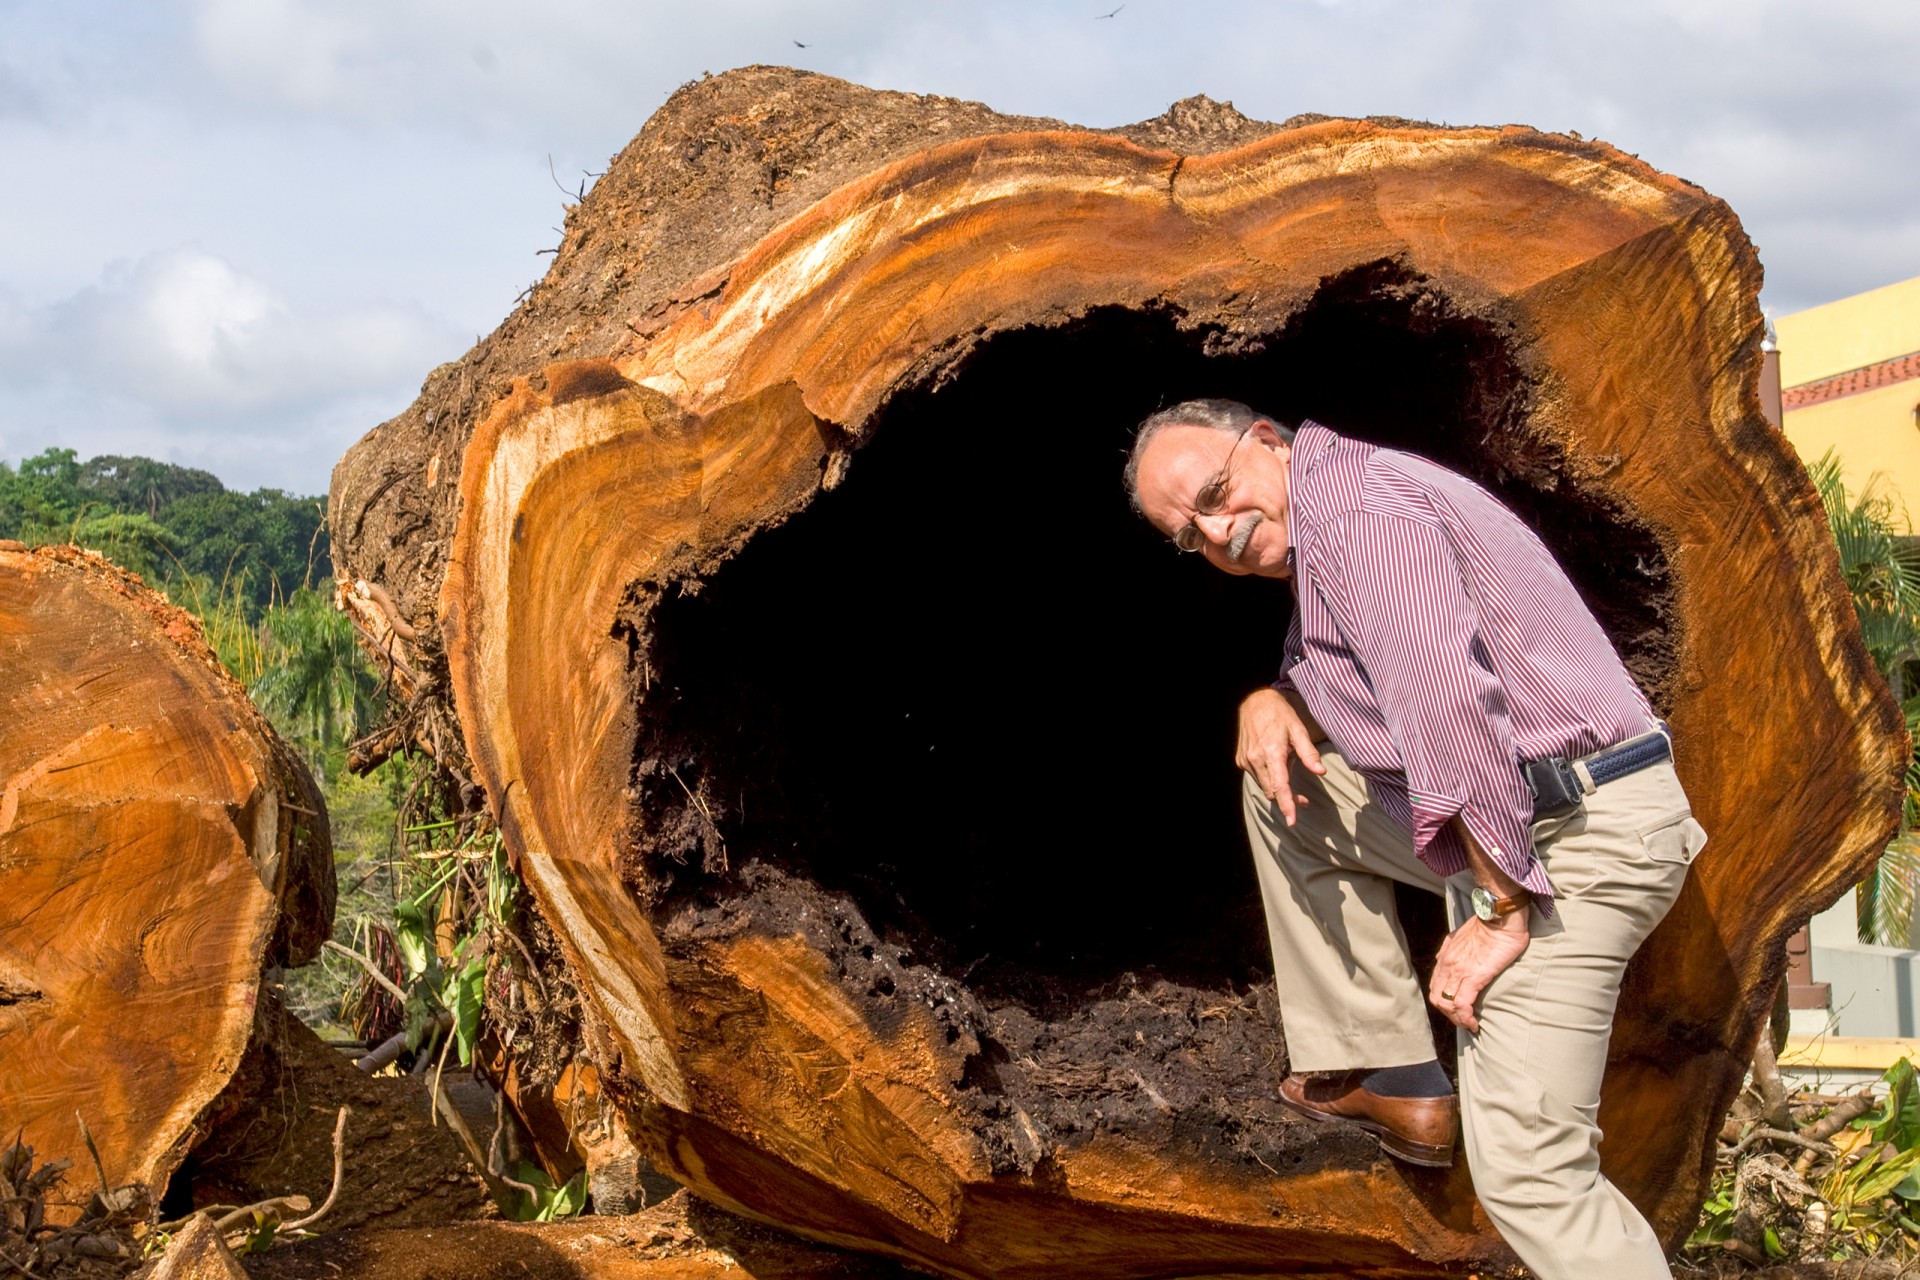 Ira Rubinoff stands inside a section of the felled corotú tree